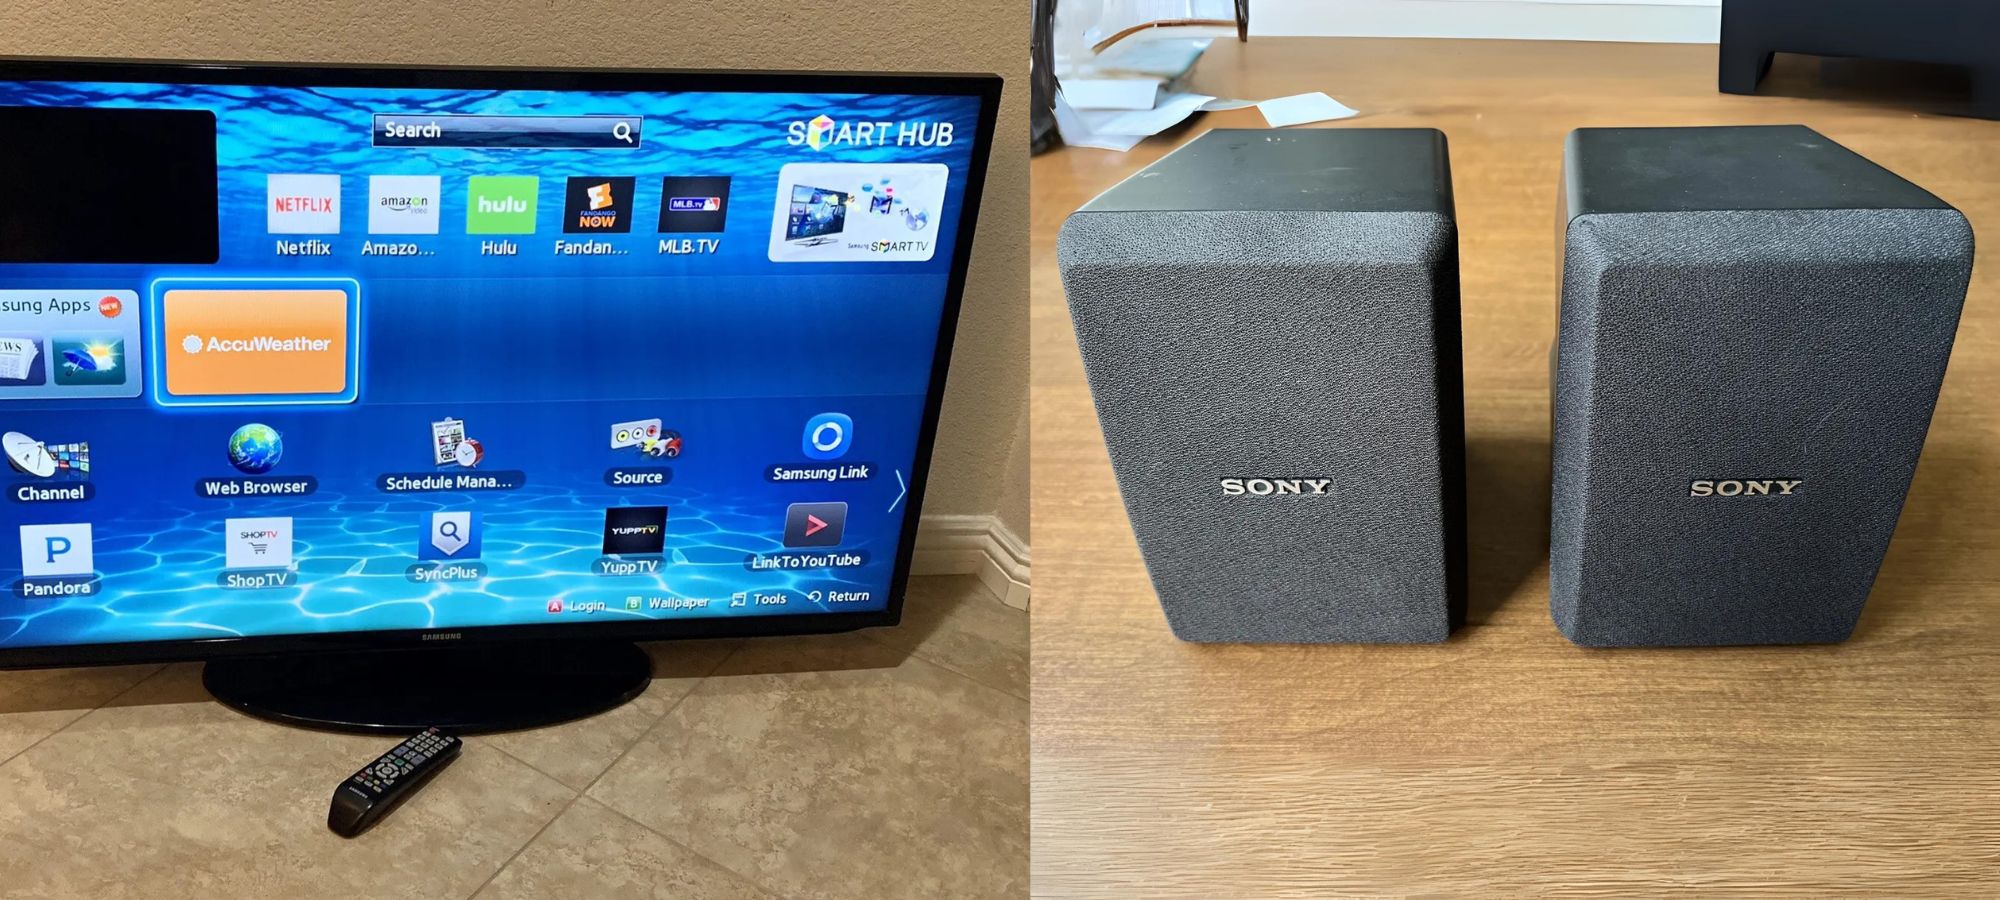 How To Connect Sony Surround Sound To Samsung Smart TV